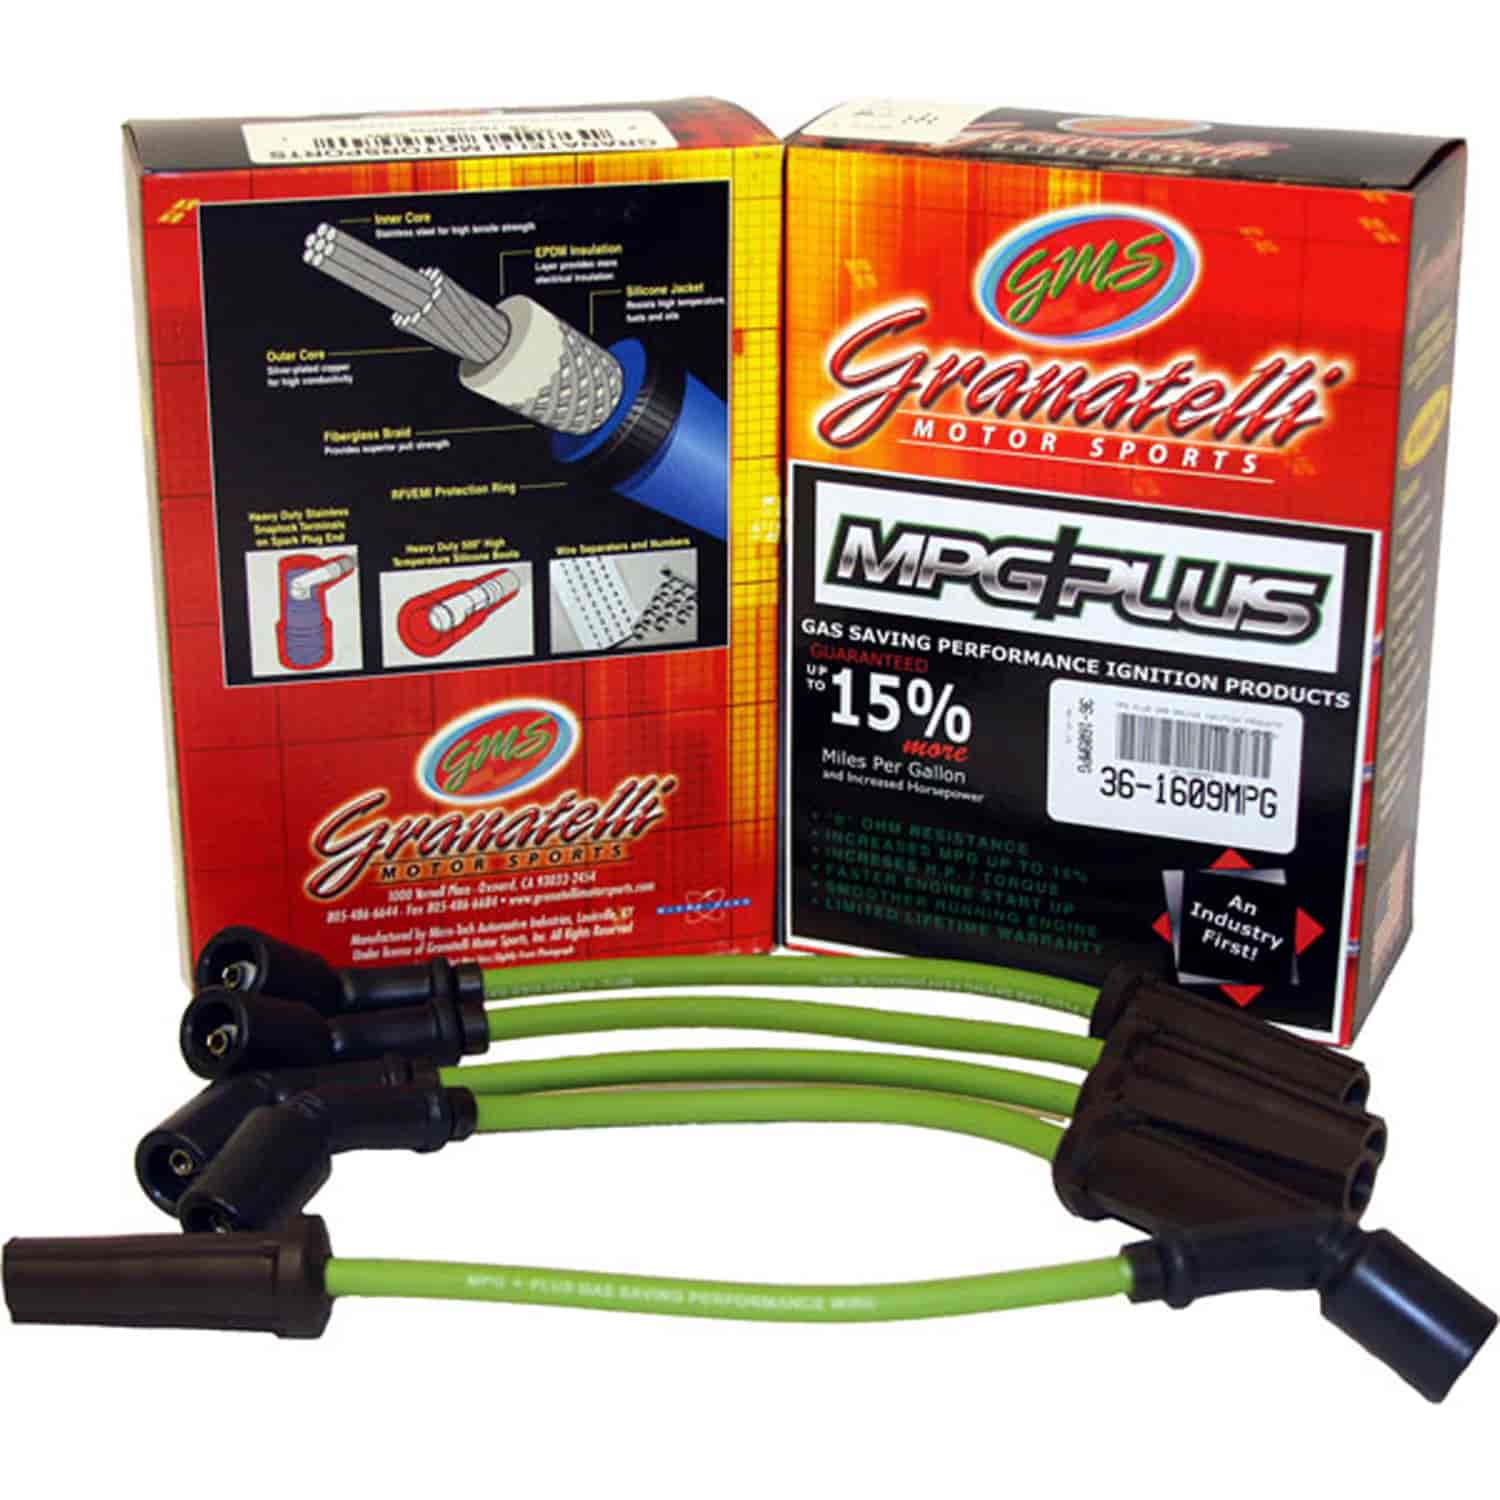 MPG Wires TOYOTA 4 RUNNER 6CYL 3.0L 92-96